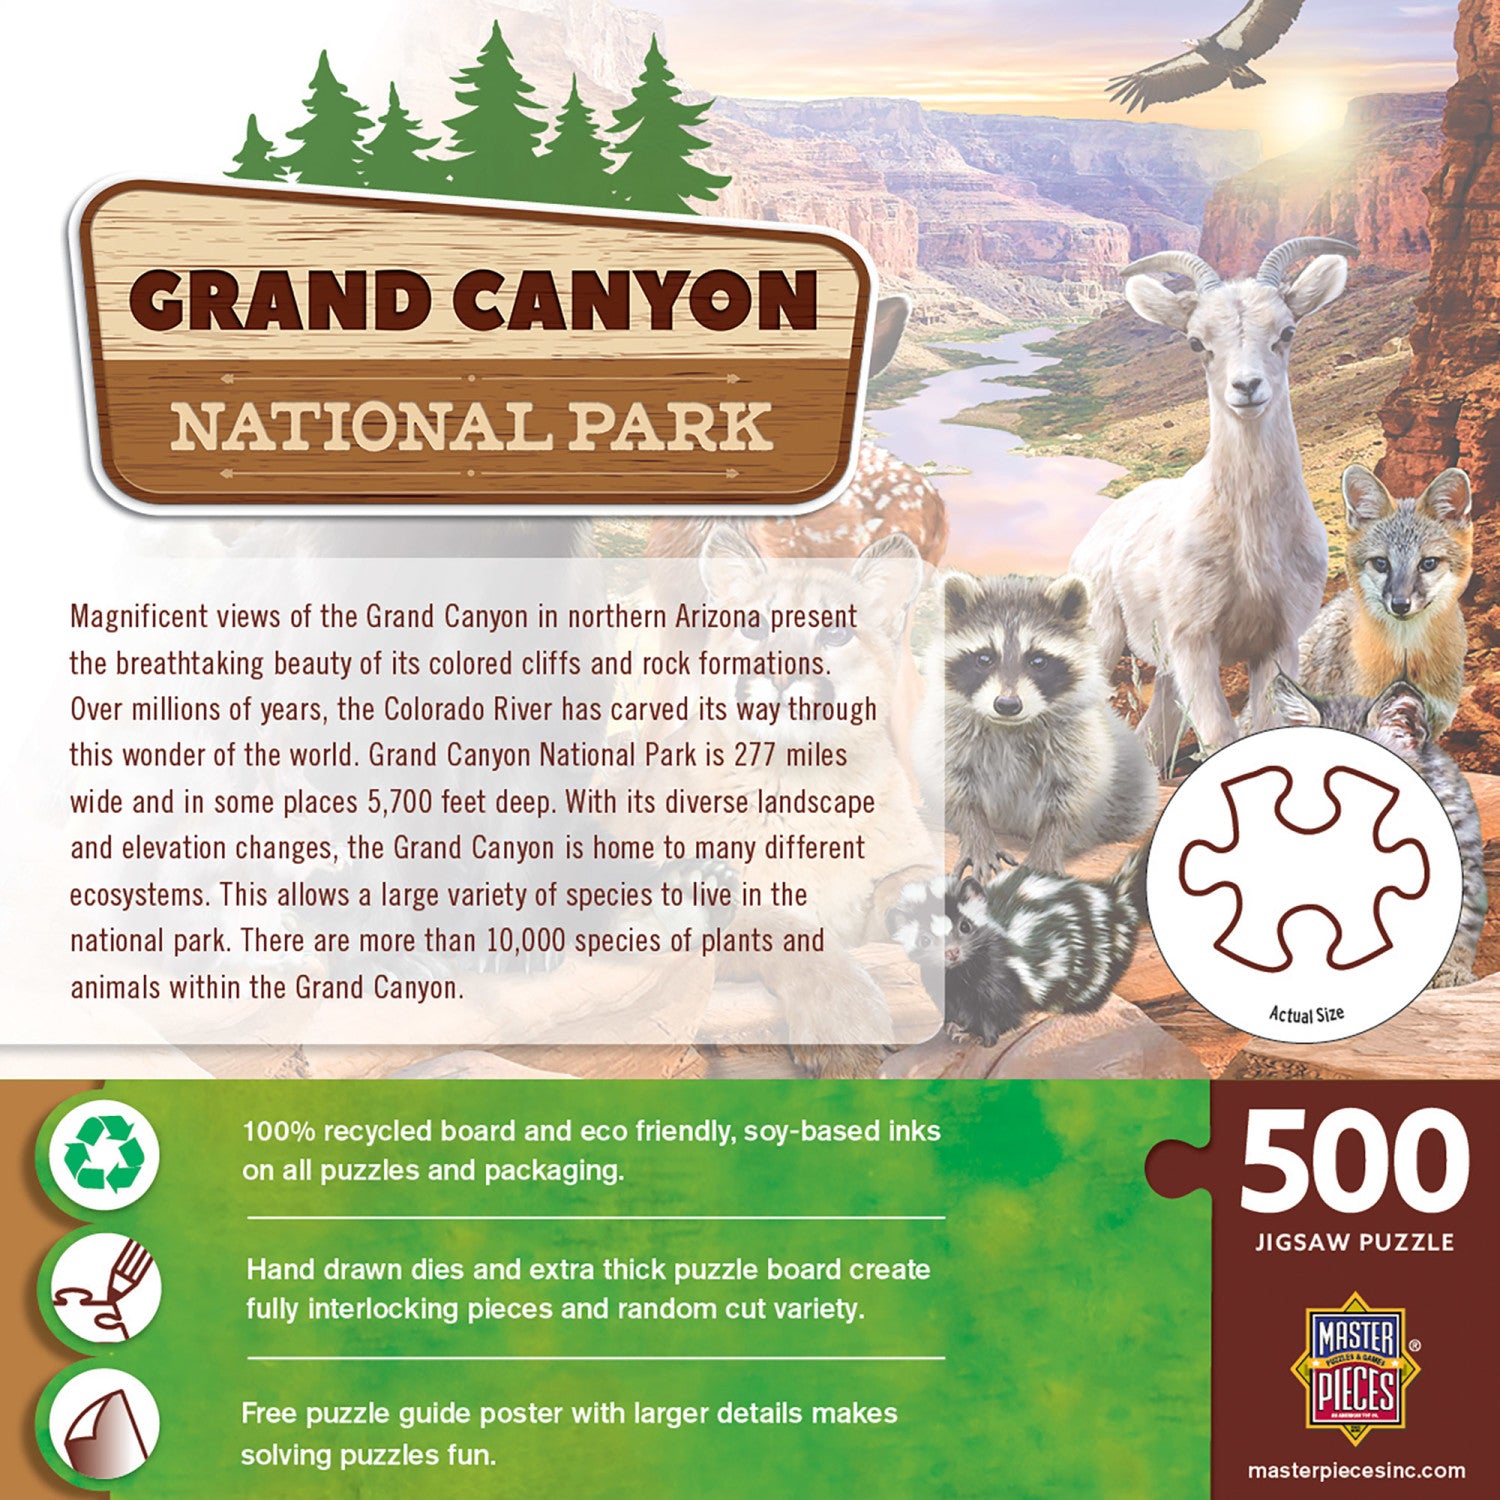 Grand Canyon National Park 500 Piece Jigsaw Puzzle